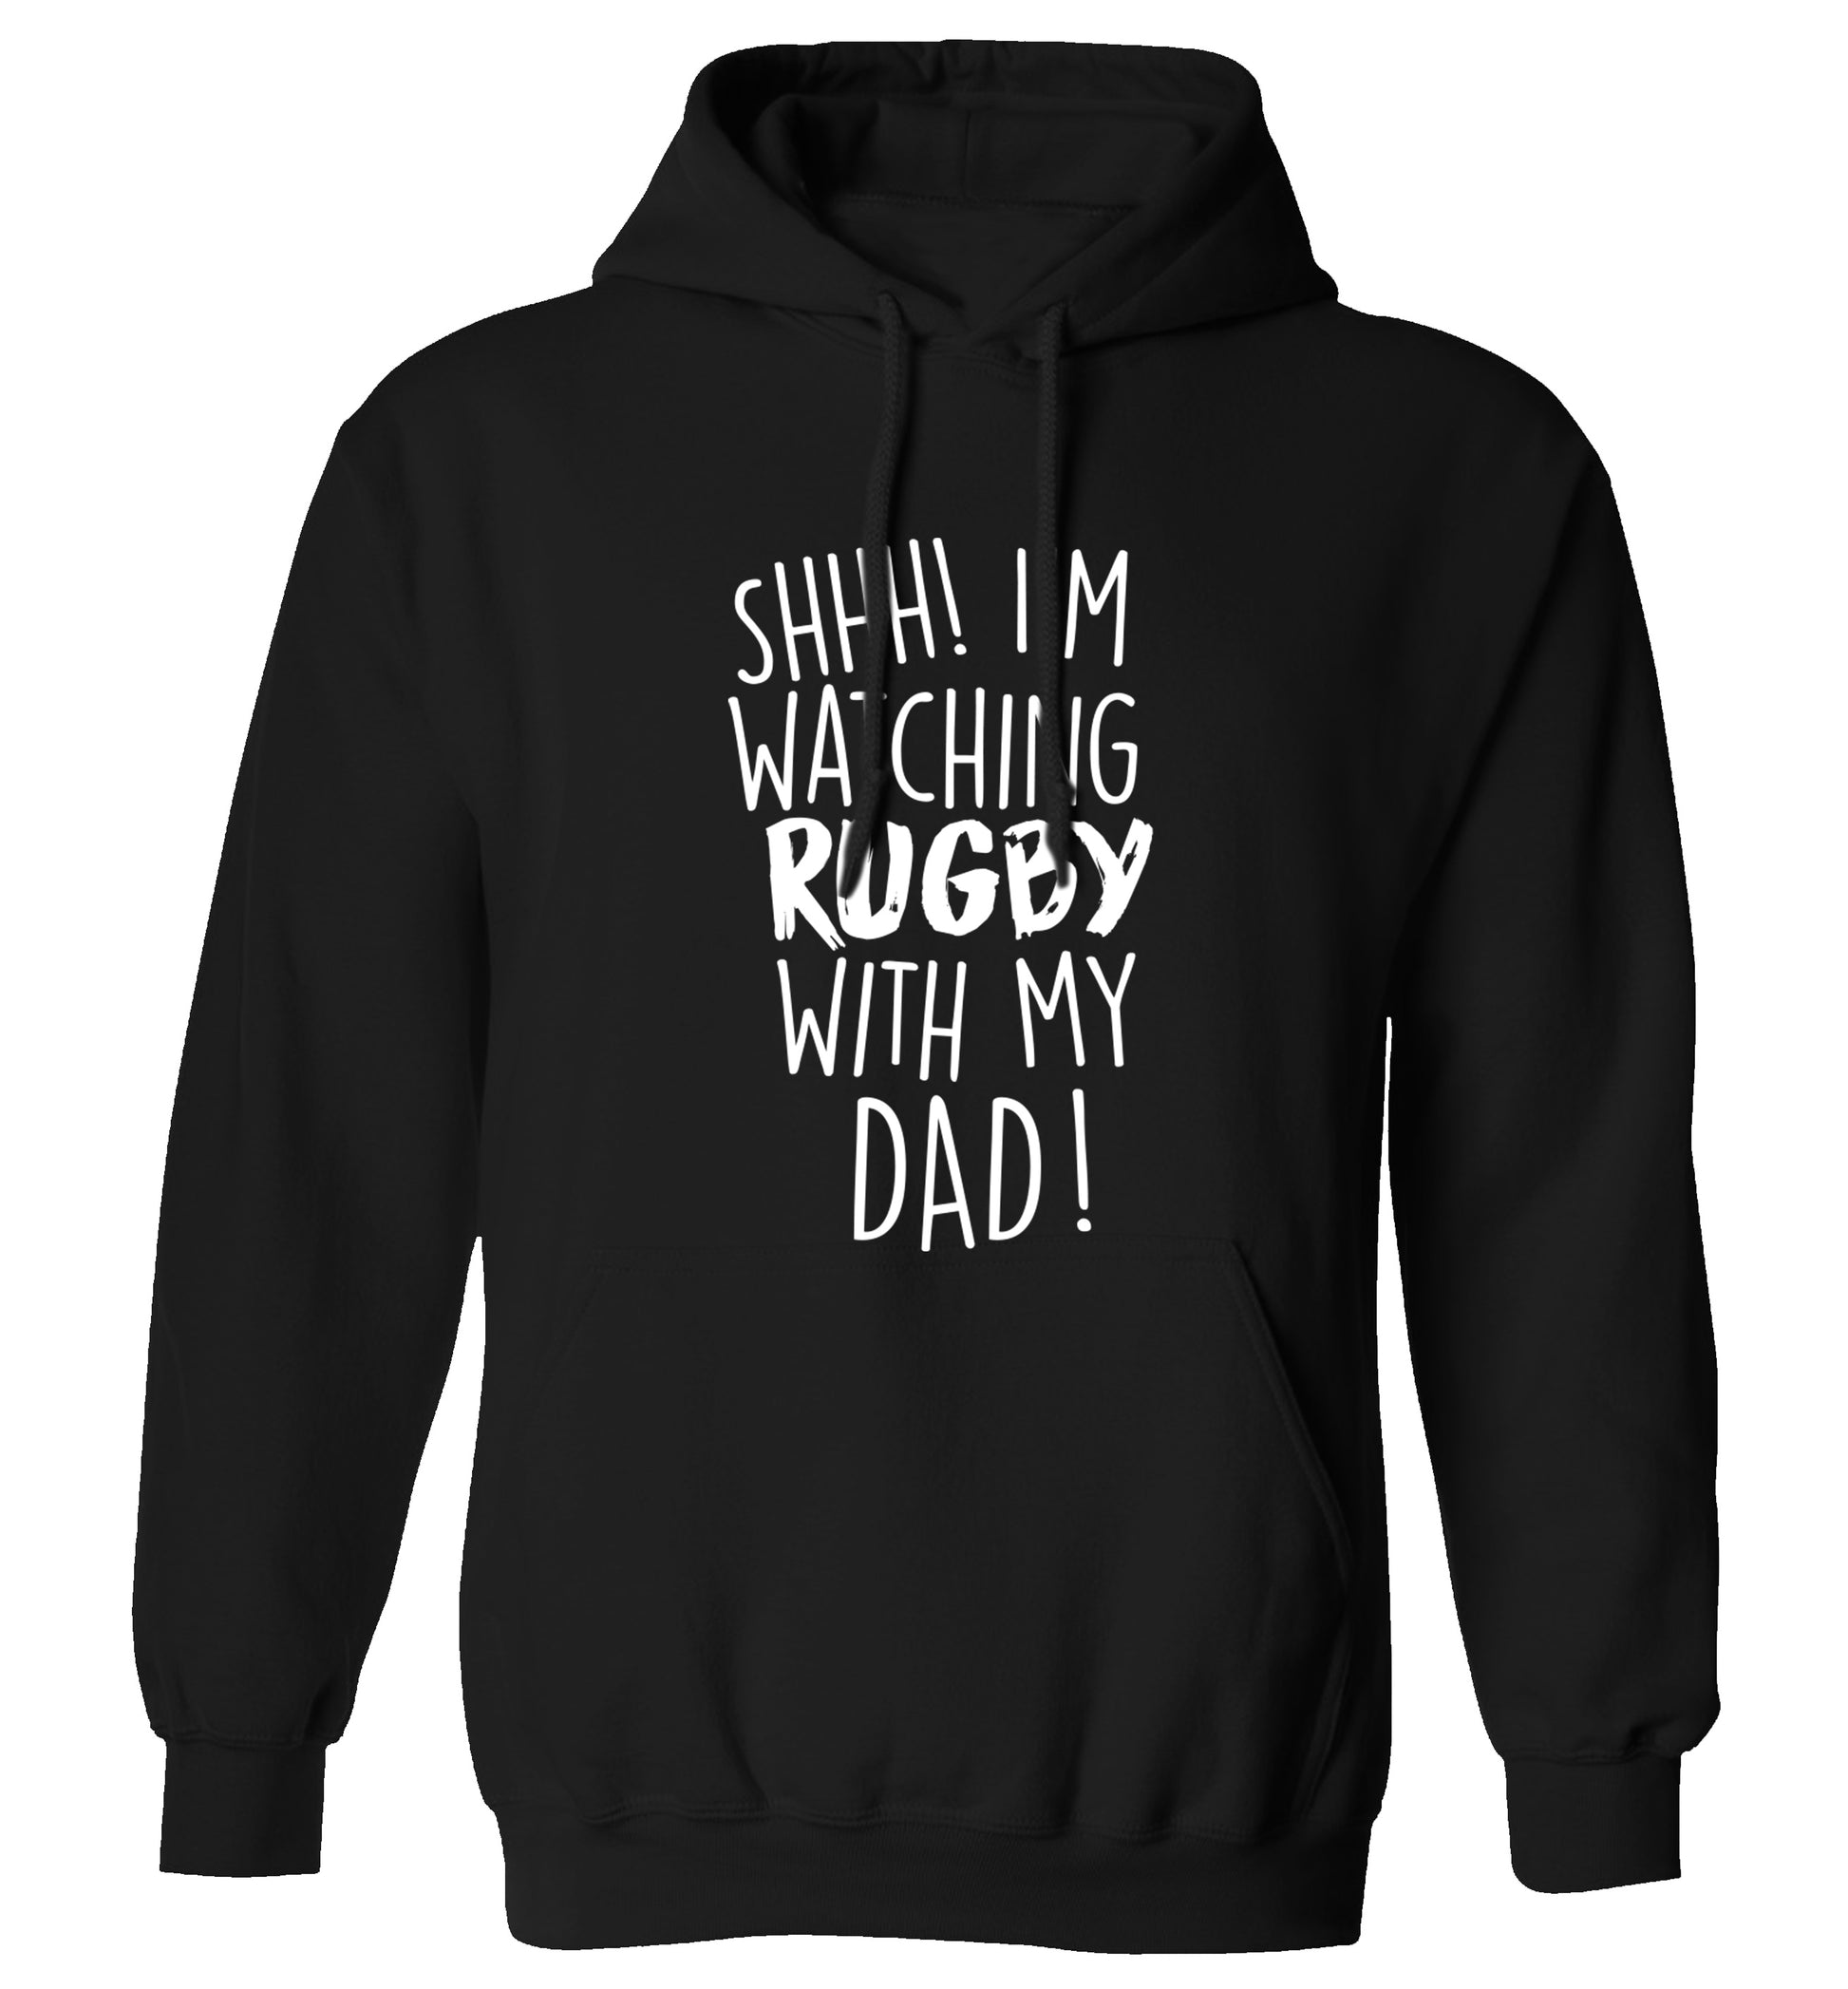 Shh... I'm watching rugby with my dad adults unisex black hoodie 2XL